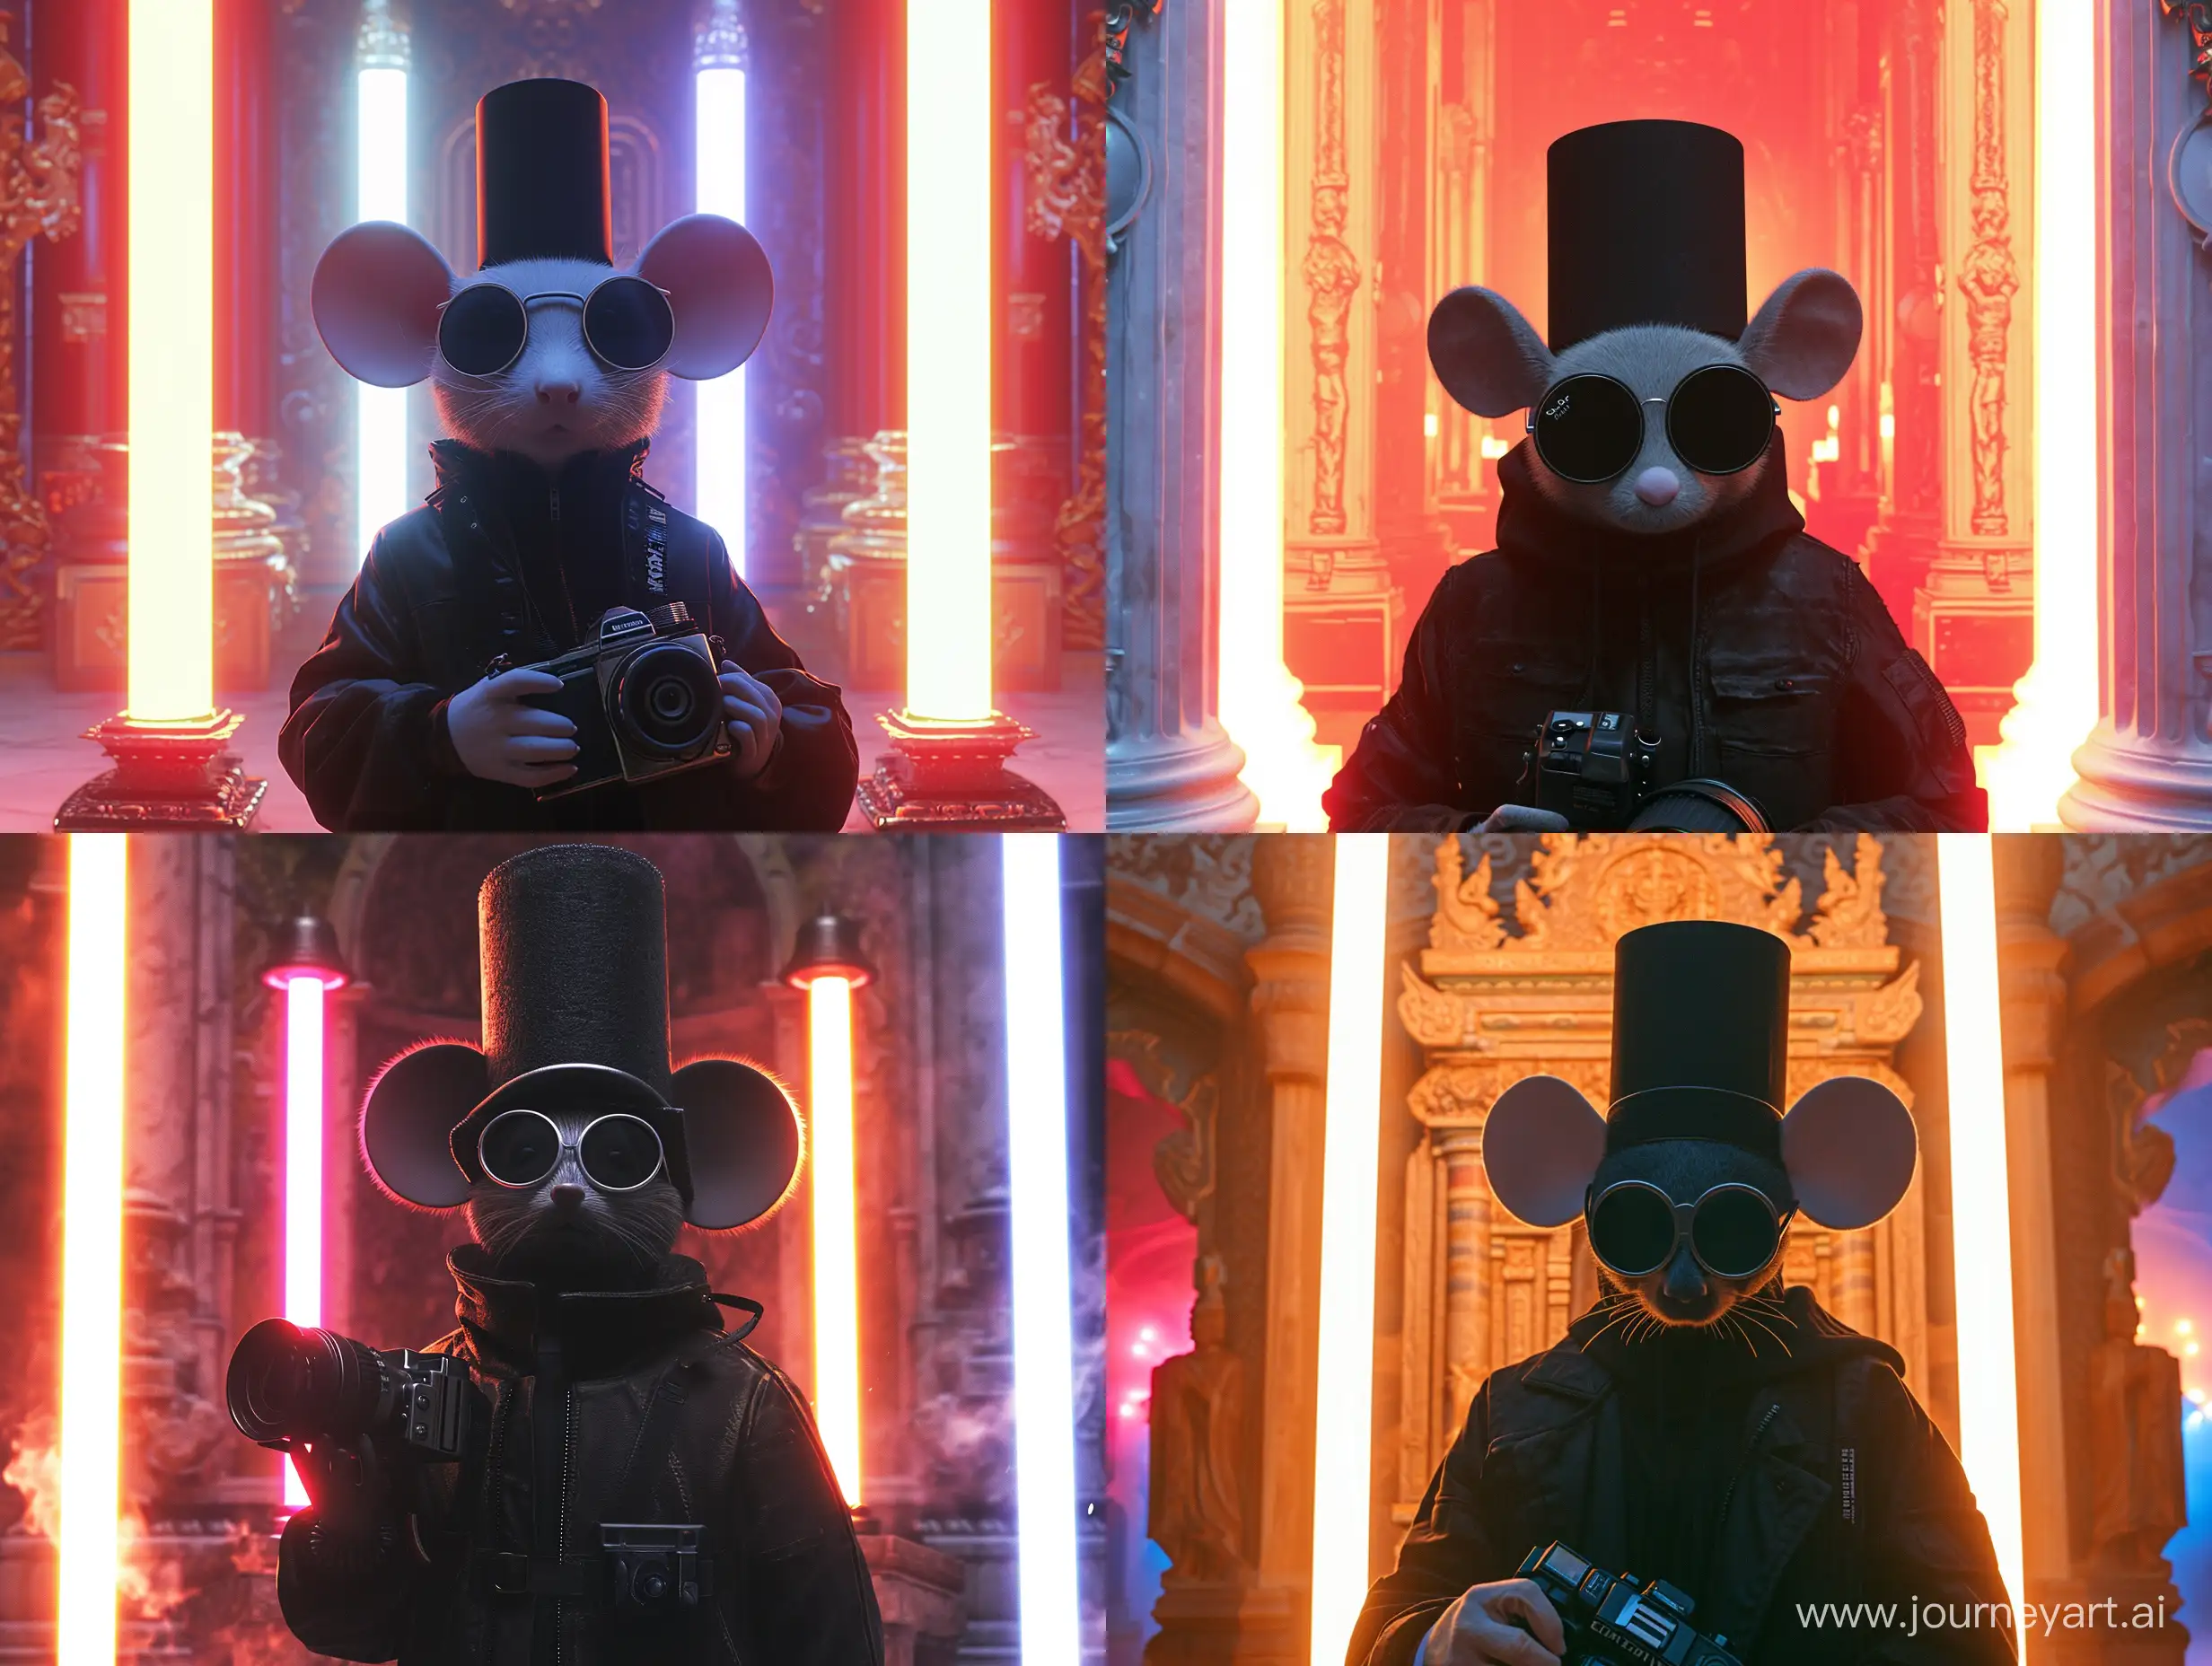 avatar picture of  Mouse with round black sunglasses, black cylinder hat and black jacket holding digital camera. There are two colors light sources comming from sides  and one white from behind.

Style: majestic 
Scene: Temple of  enlightenment with two different colour source light from opposite sides.





